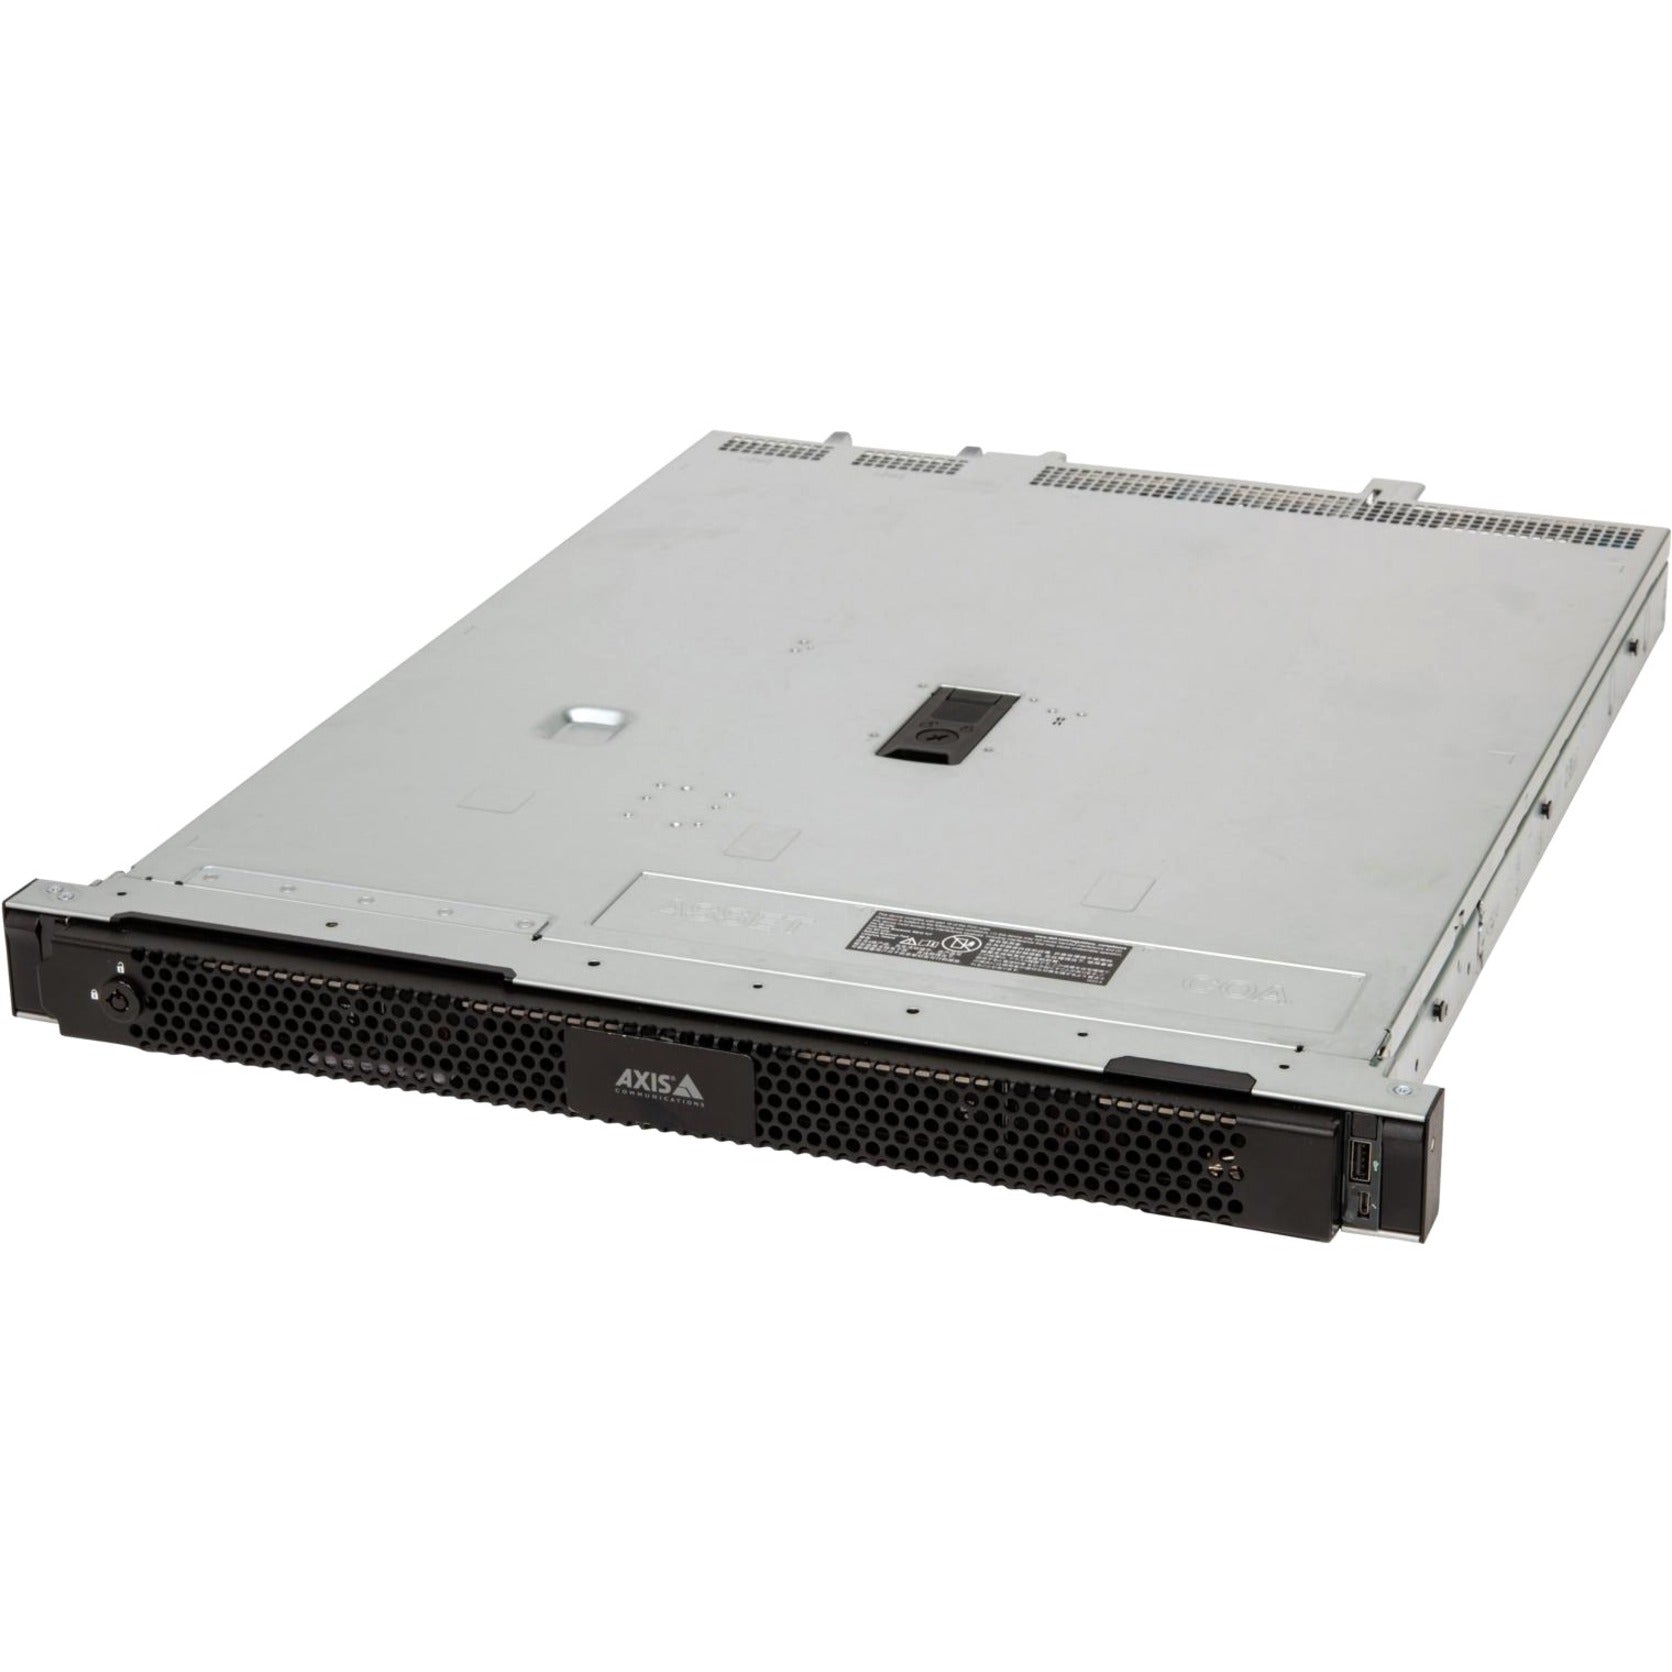 AXIS 02538-001 Camera Station S1232 Rack Recording Server, 32 TB HDD, 5 Year Warranty